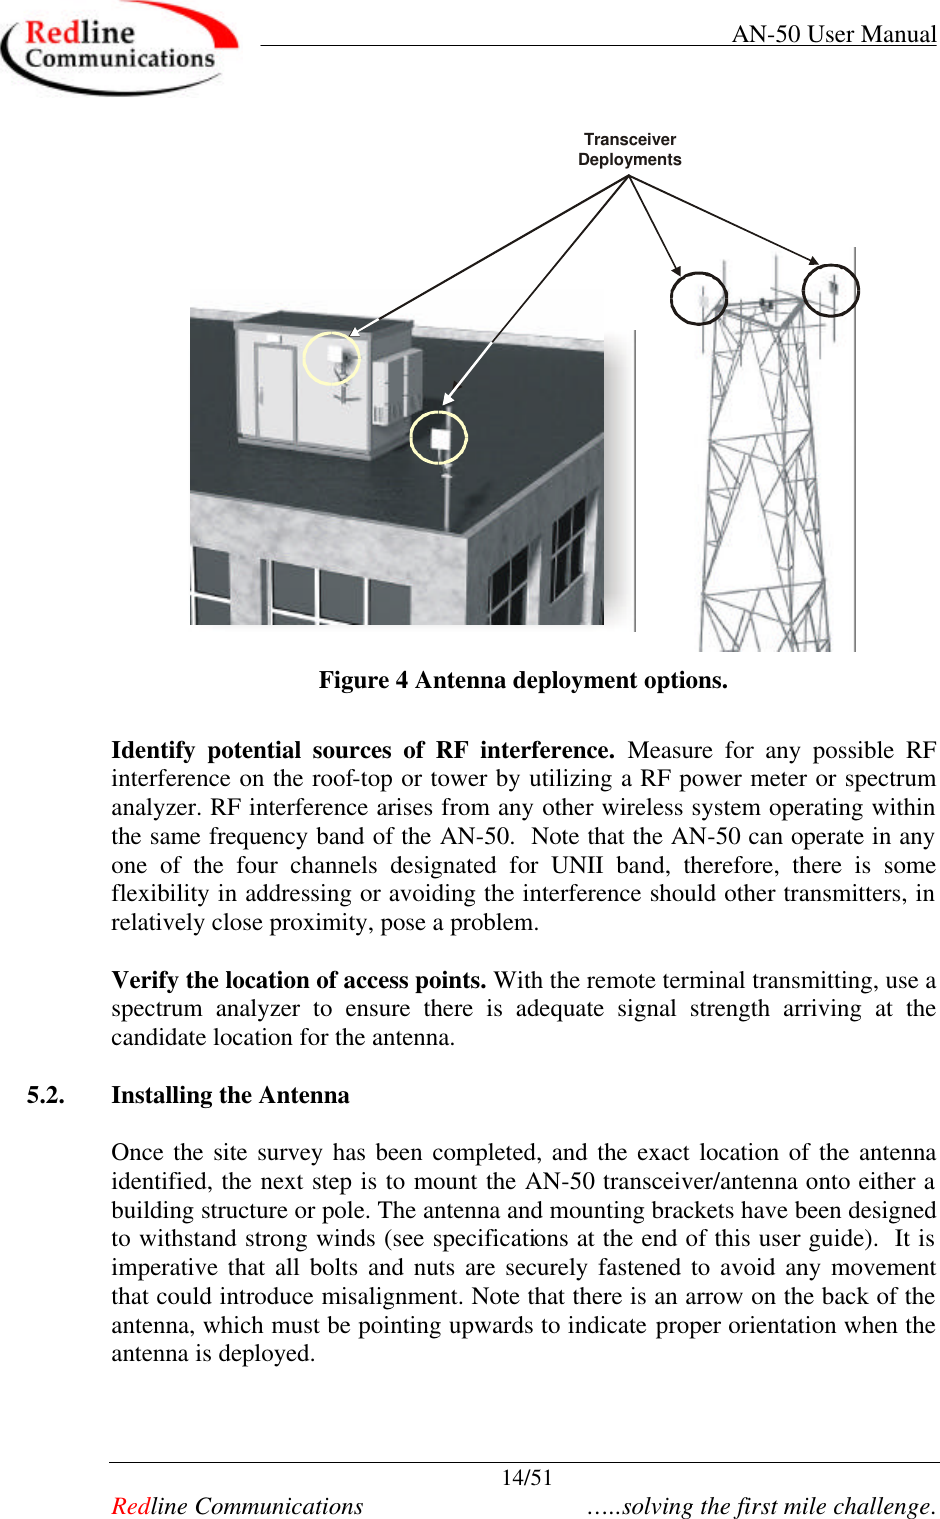     AN-50 User Manual  14/51   Redline Communications    …..solving the first mile challenge.  Transceiver Deployments  Figure 4 Antenna deployment options.  Identify potential sources of RF interference. Measure for any possible RF interference on the roof-top or tower by utilizing a RF power meter or spectrum analyzer. RF interference arises from any other wireless system operating within the same frequency band of the AN-50.  Note that the AN-50 can operate in any one of the four channels designated for UNII band, therefore, there is some flexibility in addressing or avoiding the interference should other transmitters, in relatively close proximity, pose a problem.      Verify the location of access points. With the remote terminal transmitting, use a spectrum analyzer to ensure there is adequate signal strength arriving at the candidate location for the antenna.  5.2. Installing the Antenna   Once the site survey has been completed, and the exact location of the antenna identified, the next step is to mount the AN-50 transceiver/antenna onto either a building structure or pole. The antenna and mounting brackets have been designed to withstand strong winds (see specifications at the end of this user guide).  It is imperative that all bolts and nuts are securely fastened to avoid any movement that could introduce misalignment. Note that there is an arrow on the back of the antenna, which must be pointing upwards to indicate proper orientation when the antenna is deployed.     